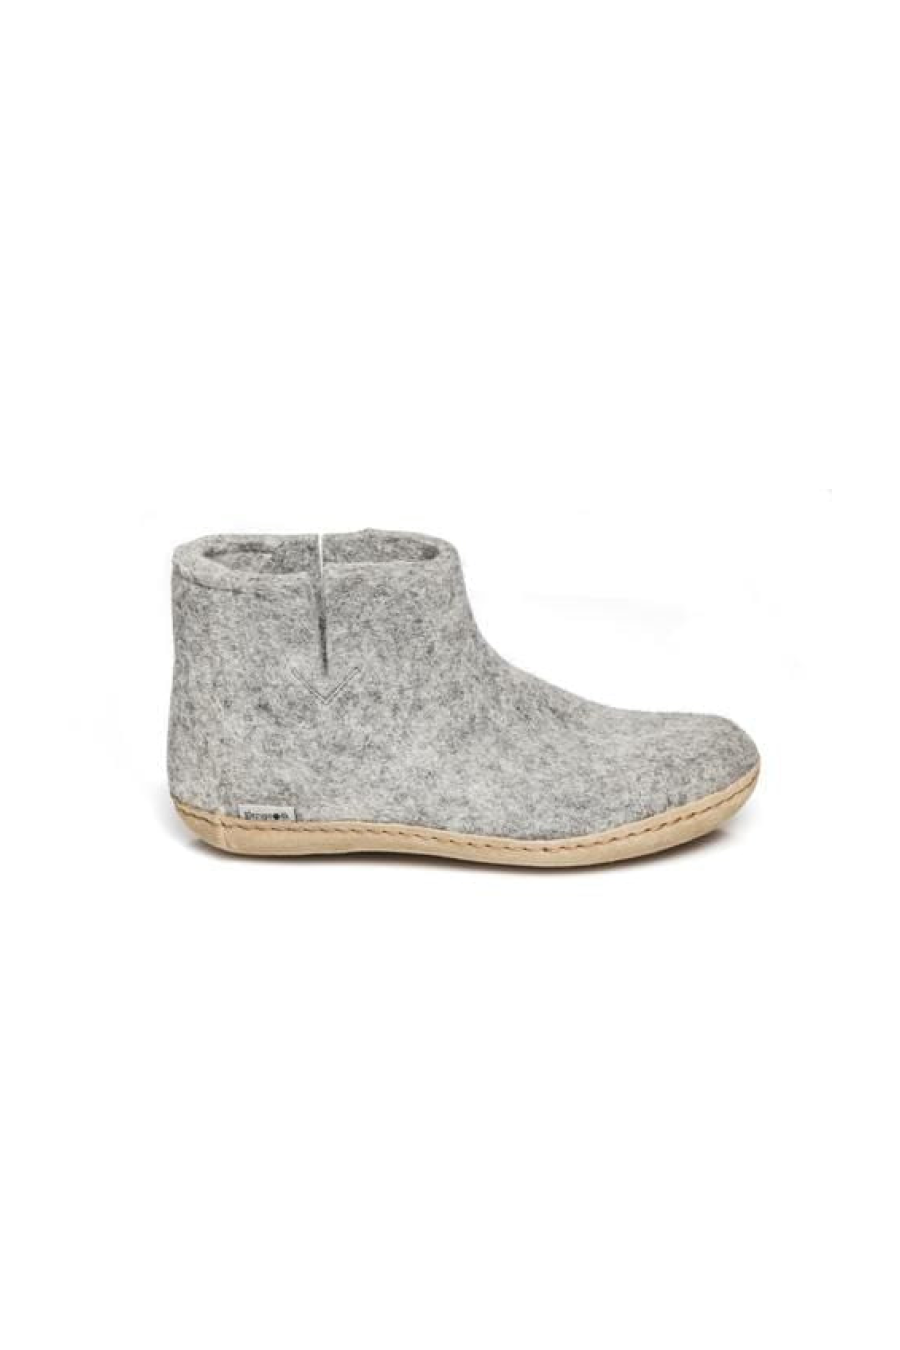 Glerups Low Boot - Leather - Grey